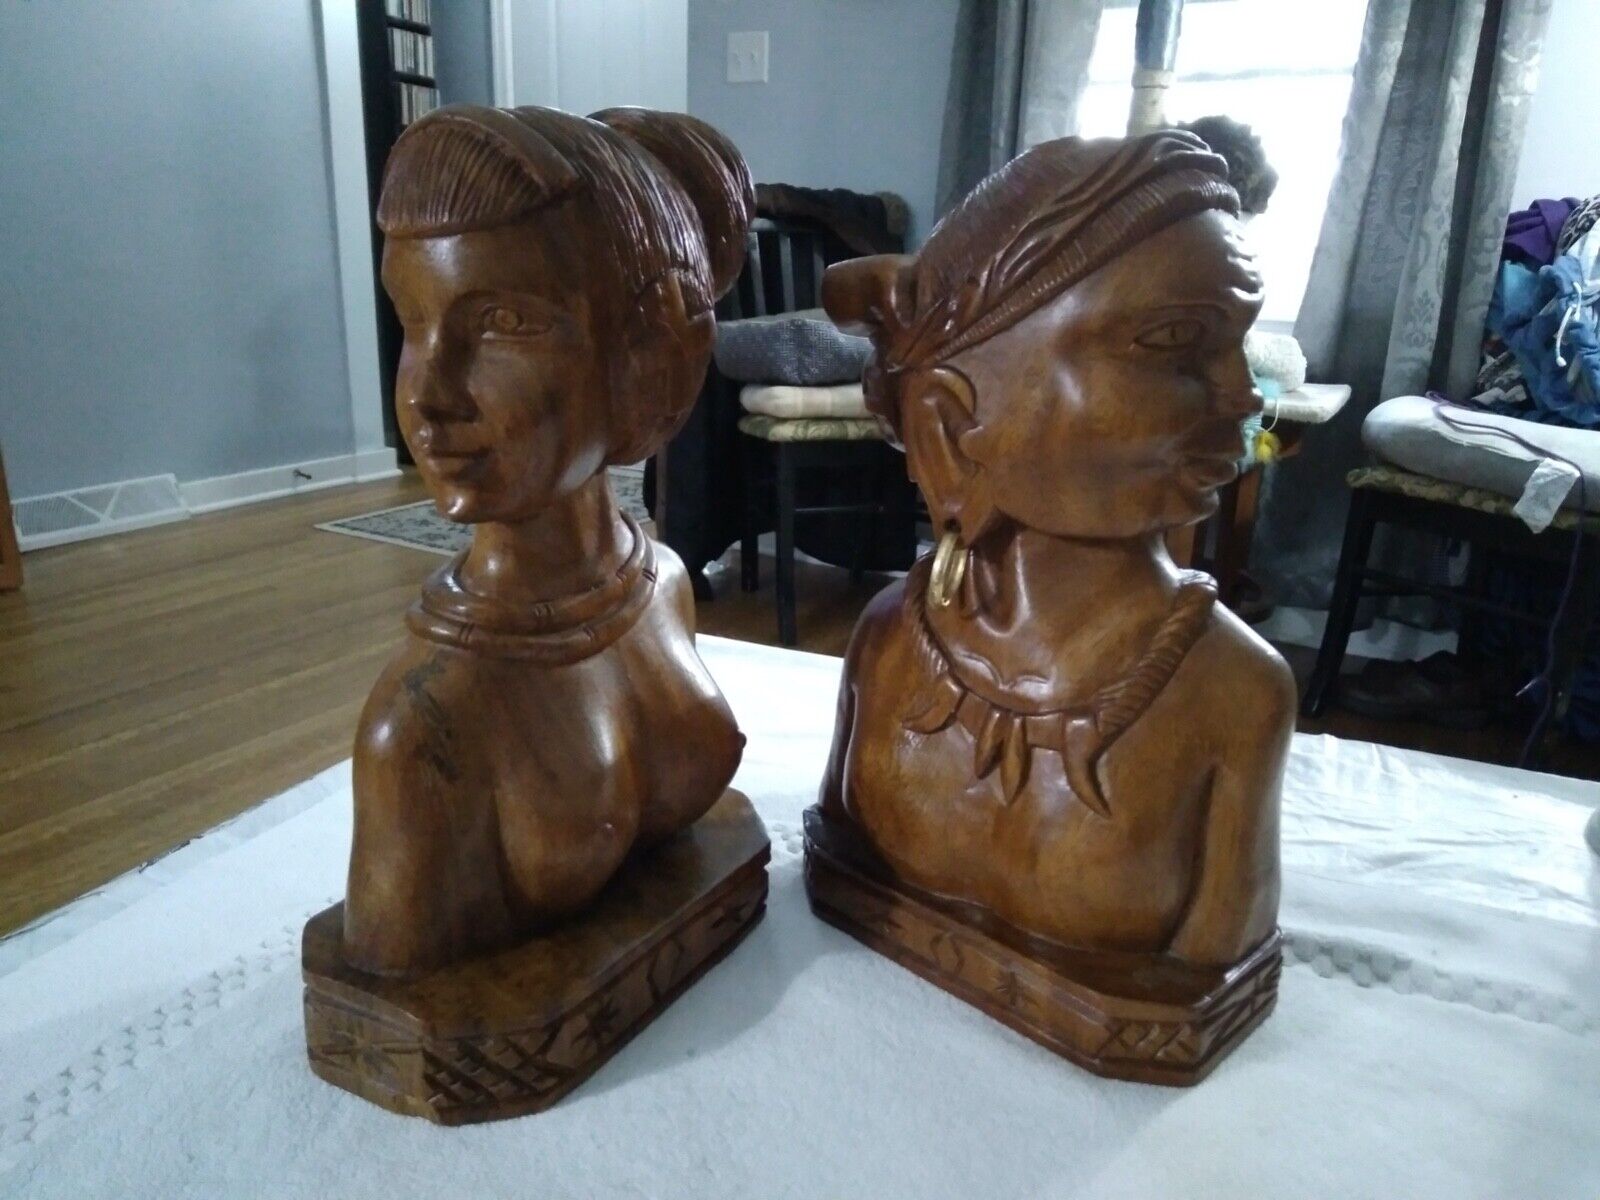 WOODEN SCULPTURE - HAND CARVED OF AN ETHNIC MAN AND A WOMAN. 12\